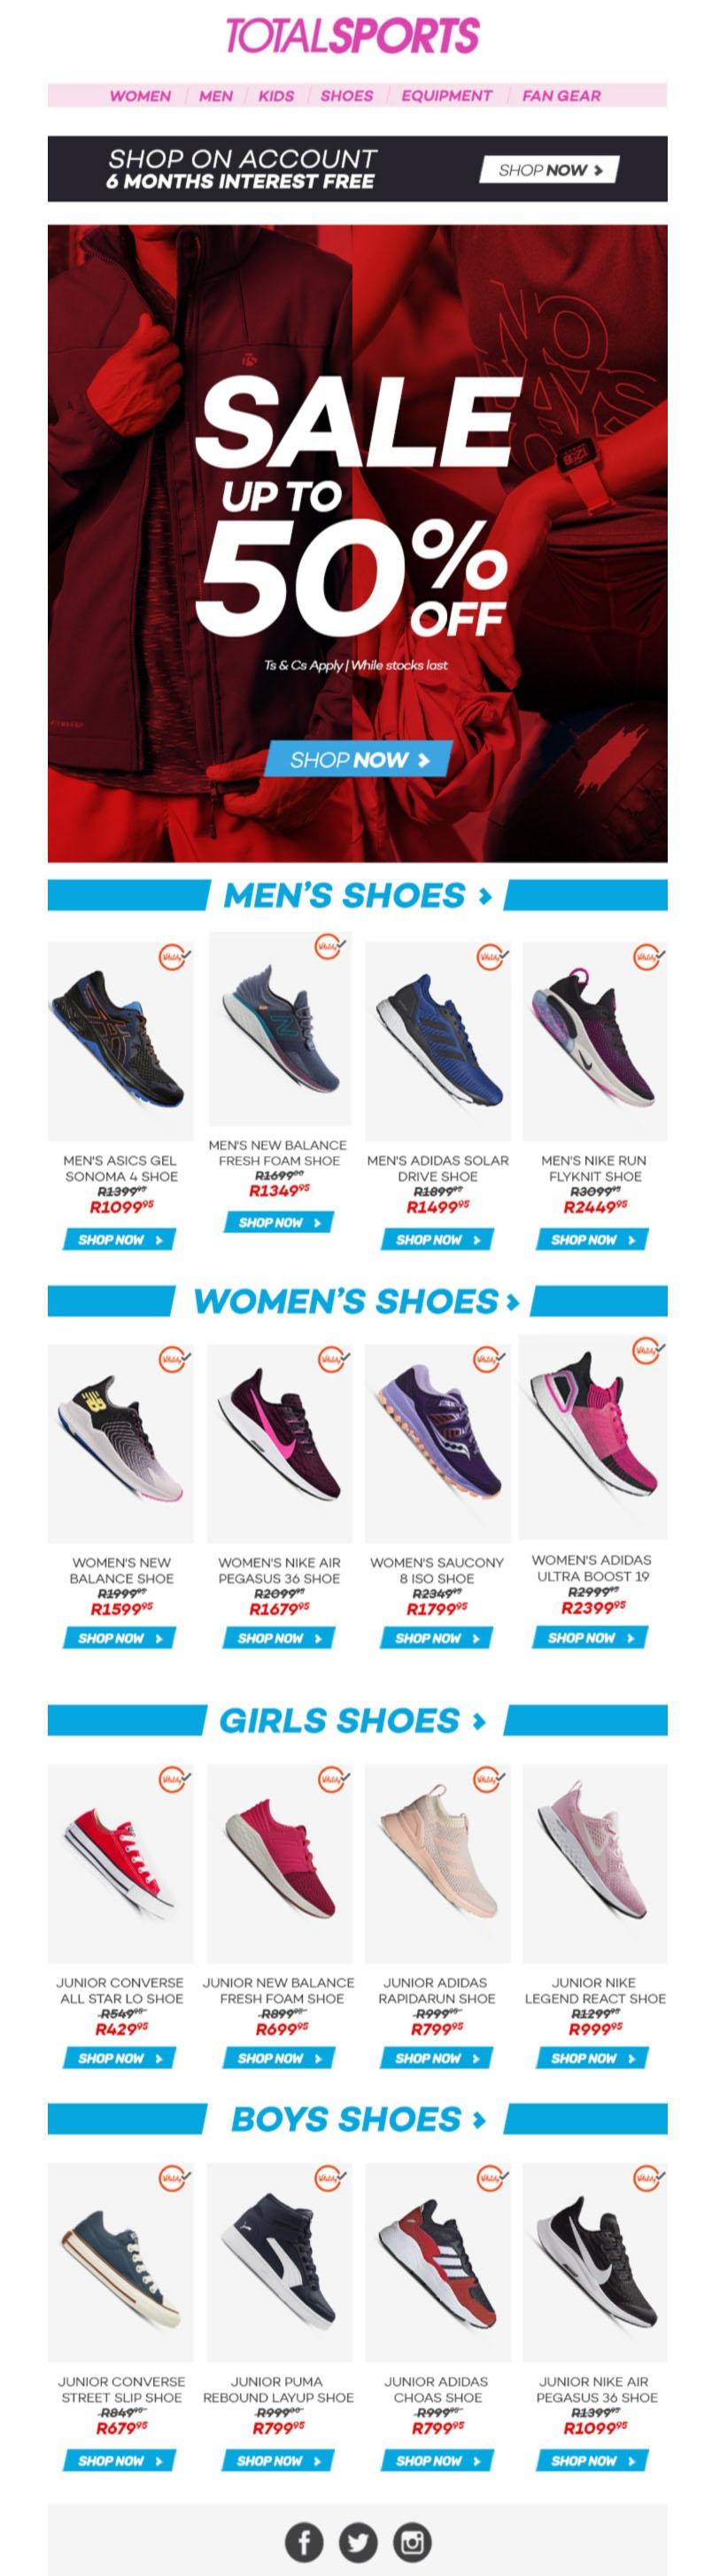 total sports nike shoes prices